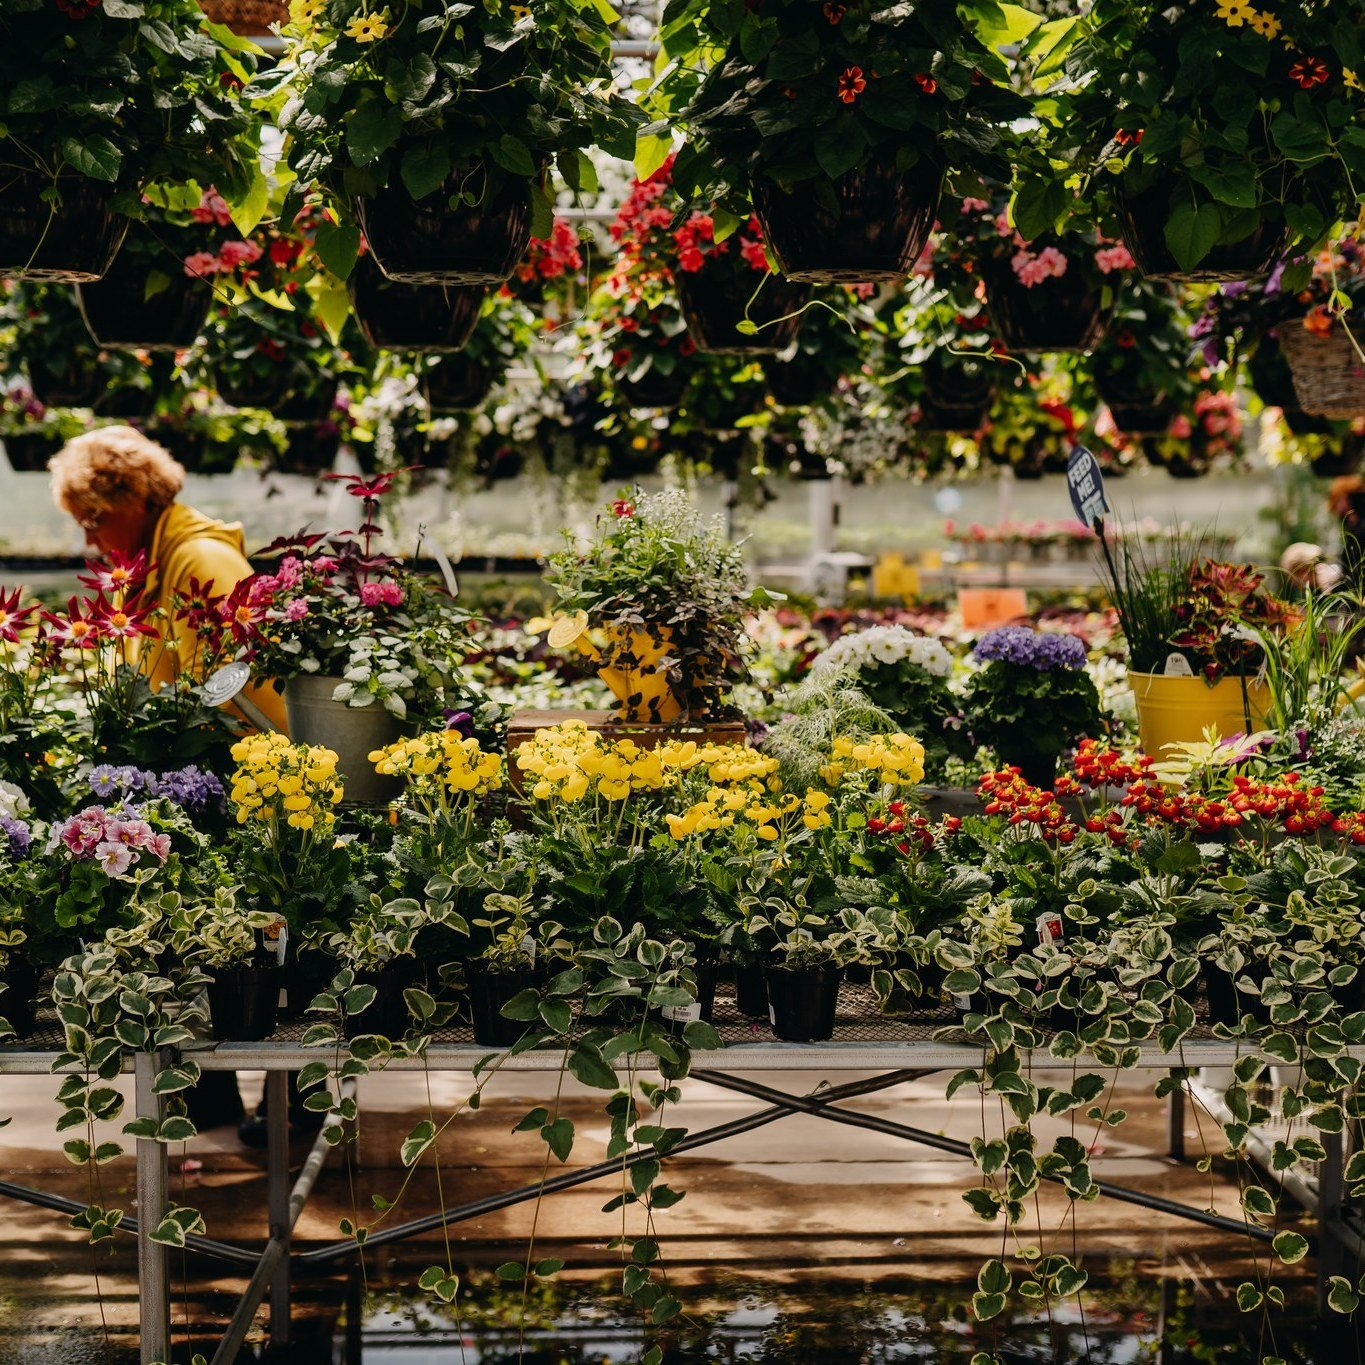 Our Garden Center Blossoms Just in Time for Mother's Day! 🌷 Treat Mom to the Gift of Nature's Beauty with our vibrant array of flowers and plants!

#mothersday #blooming #downtoearth #gardencenter #greenhouse #eauclaire